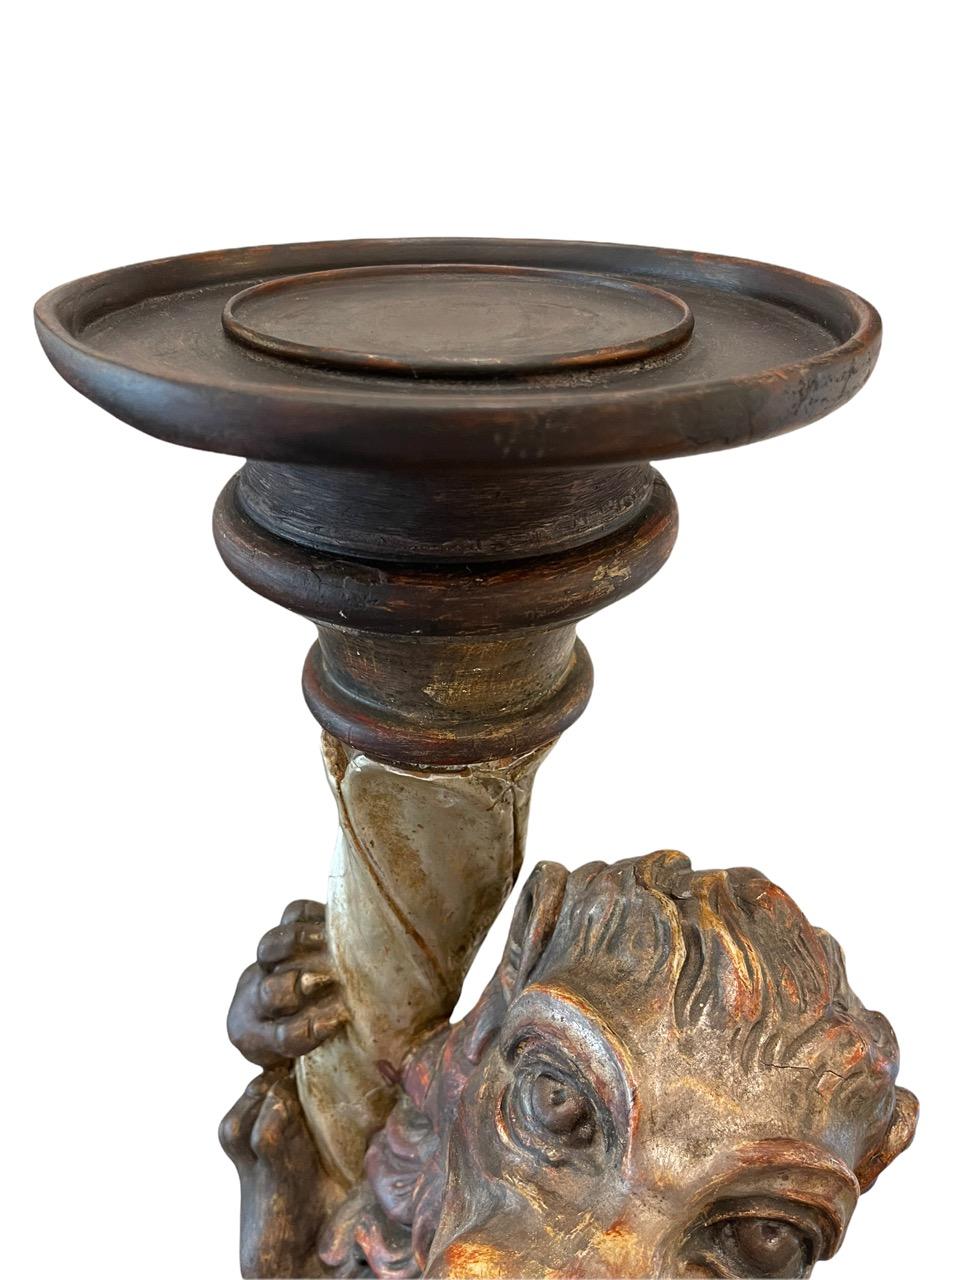 19th Century Russian Empire Carved Wood Candle Holder Sculpture In Distressed Condition For Sale In North Miami, FL